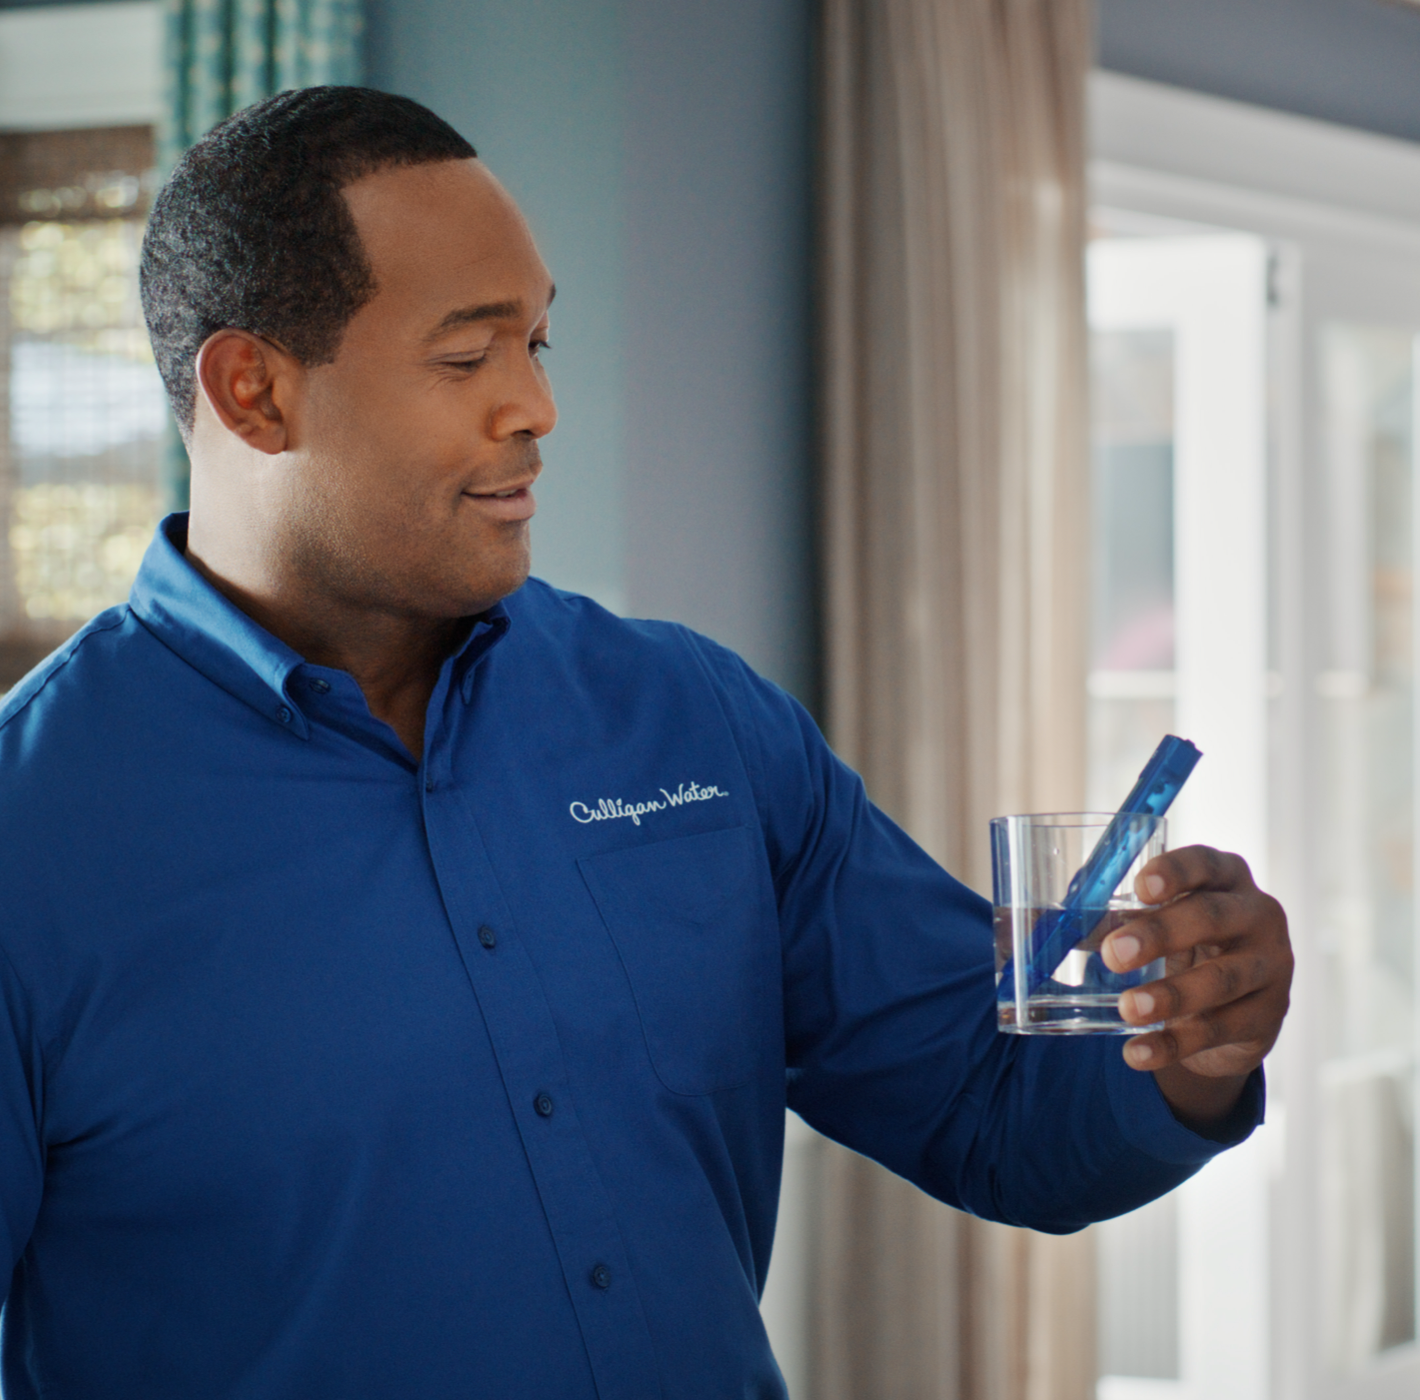 Culligan expert conducting free water test